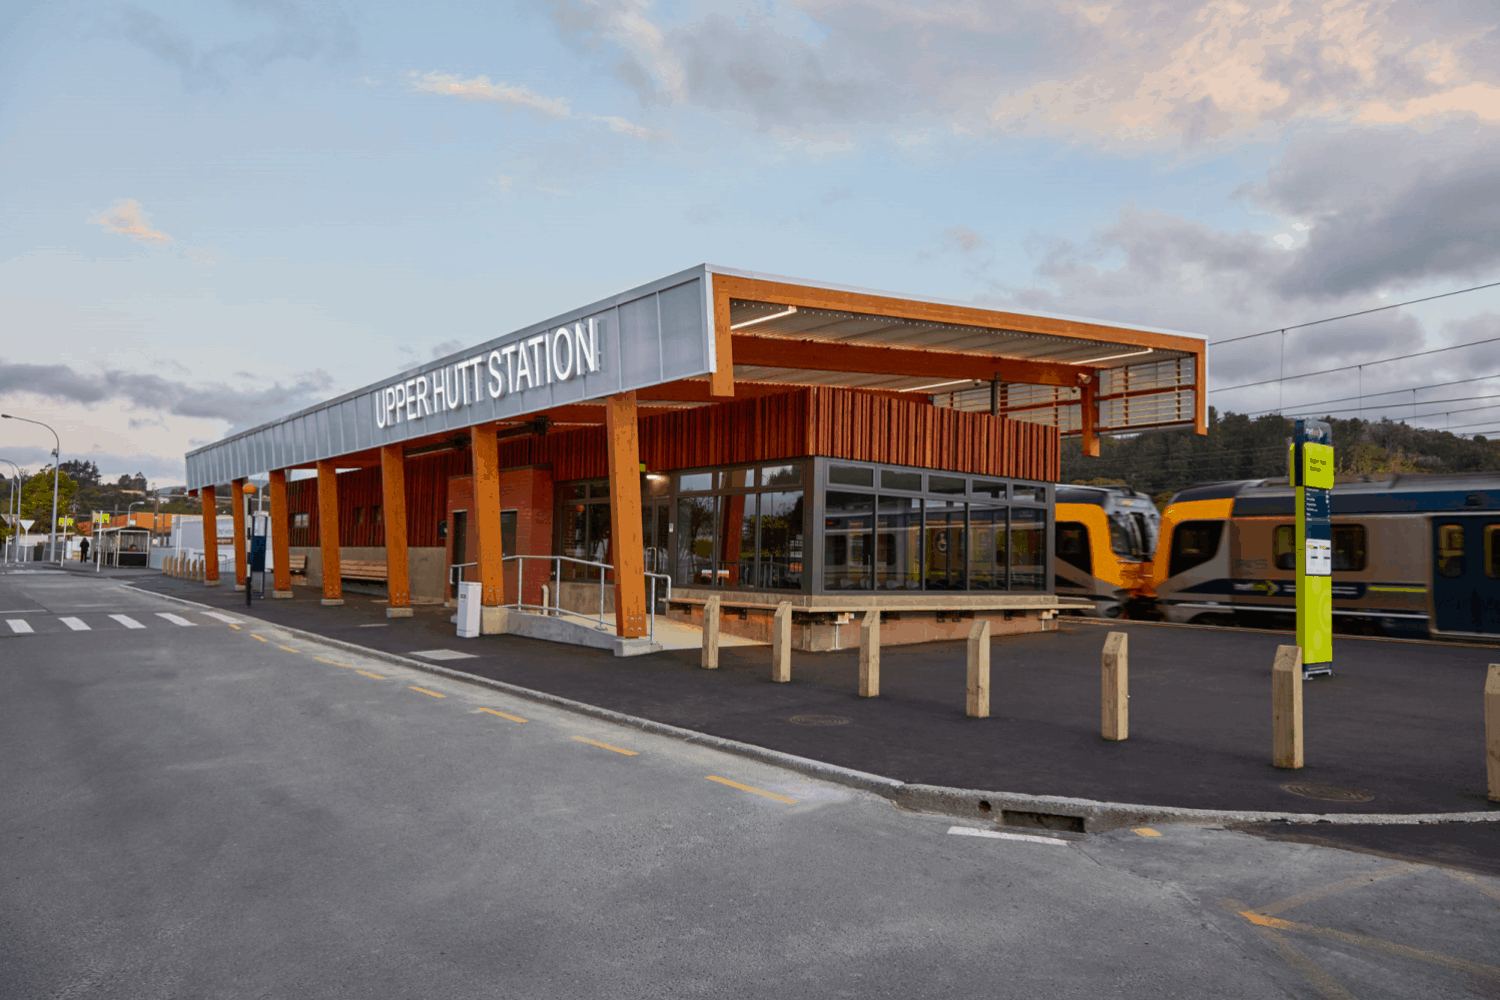 Railway Station public sector Upper Hutt Wellington exterior design with train in station